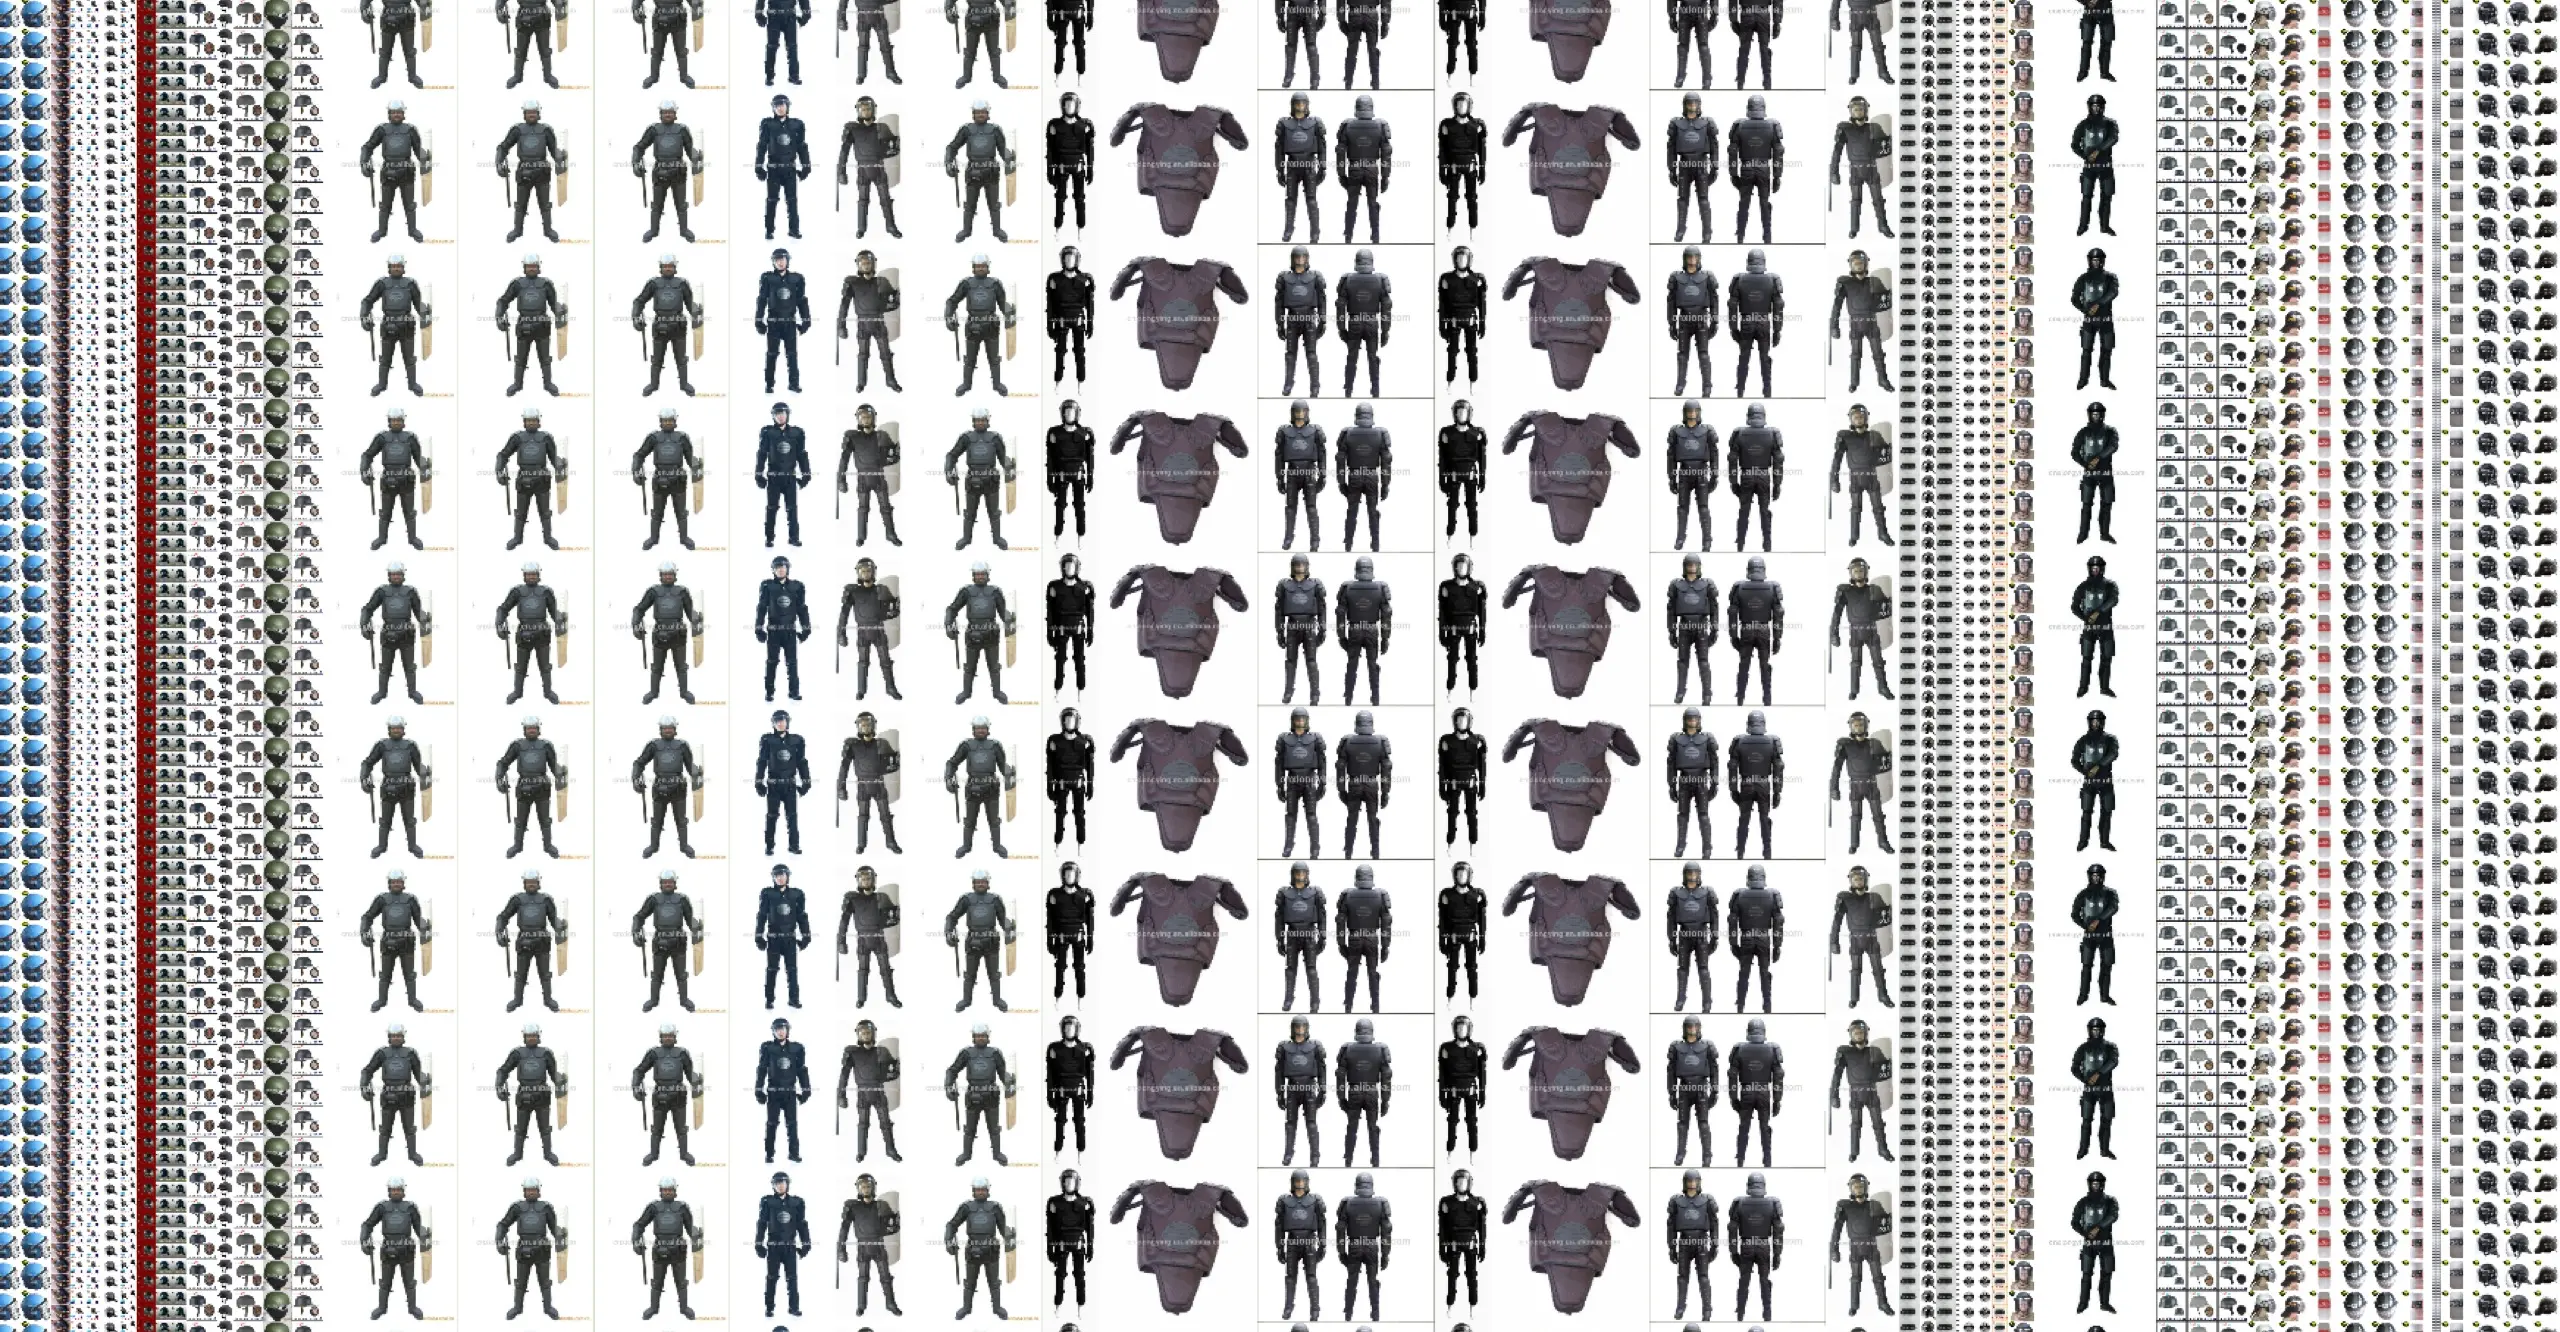 A grid of police uniforms